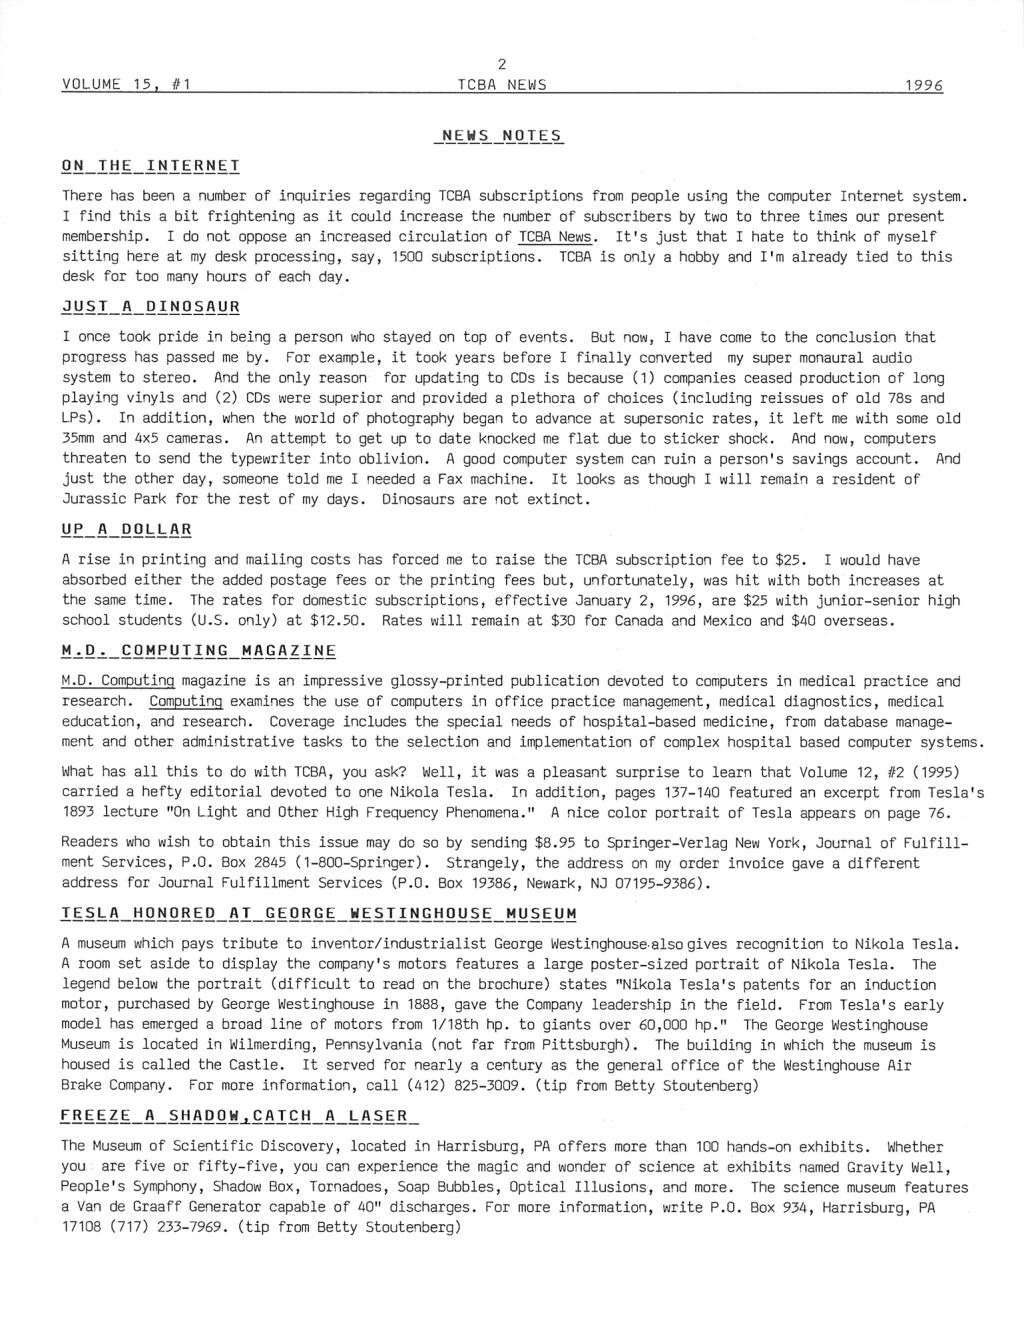 TCBA Volume 15 - Issue 1 - Page 2 of 18